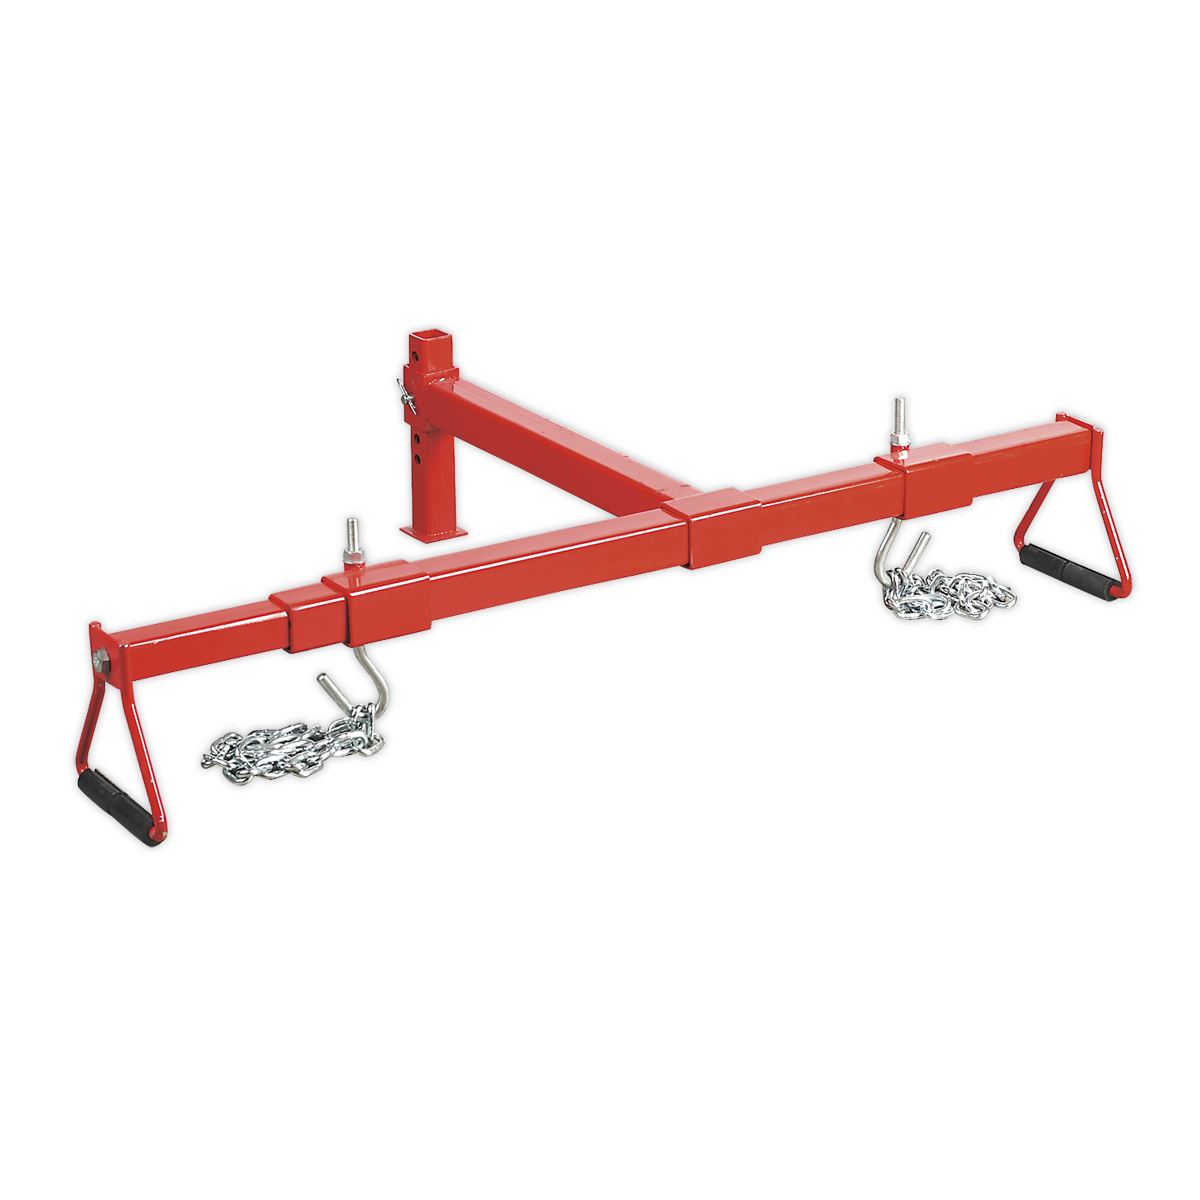 Sealey Heavy-Duty Engine Support Beam 600kg